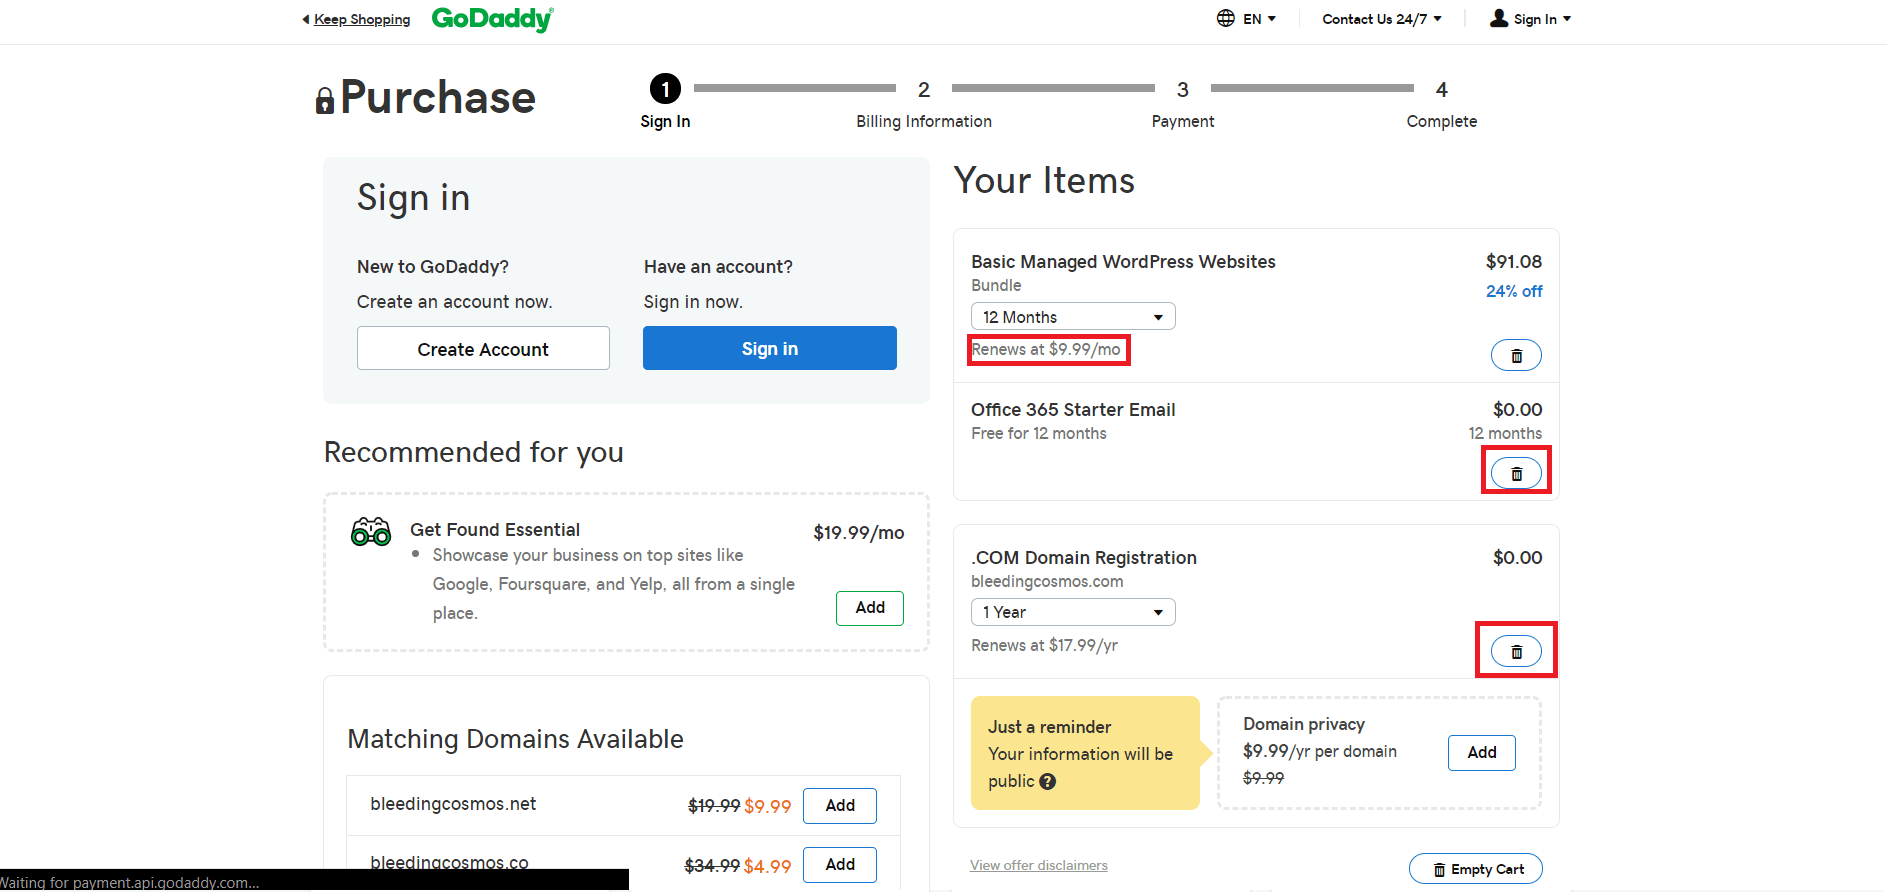 How to Create a New Account with GoDaddy-image5